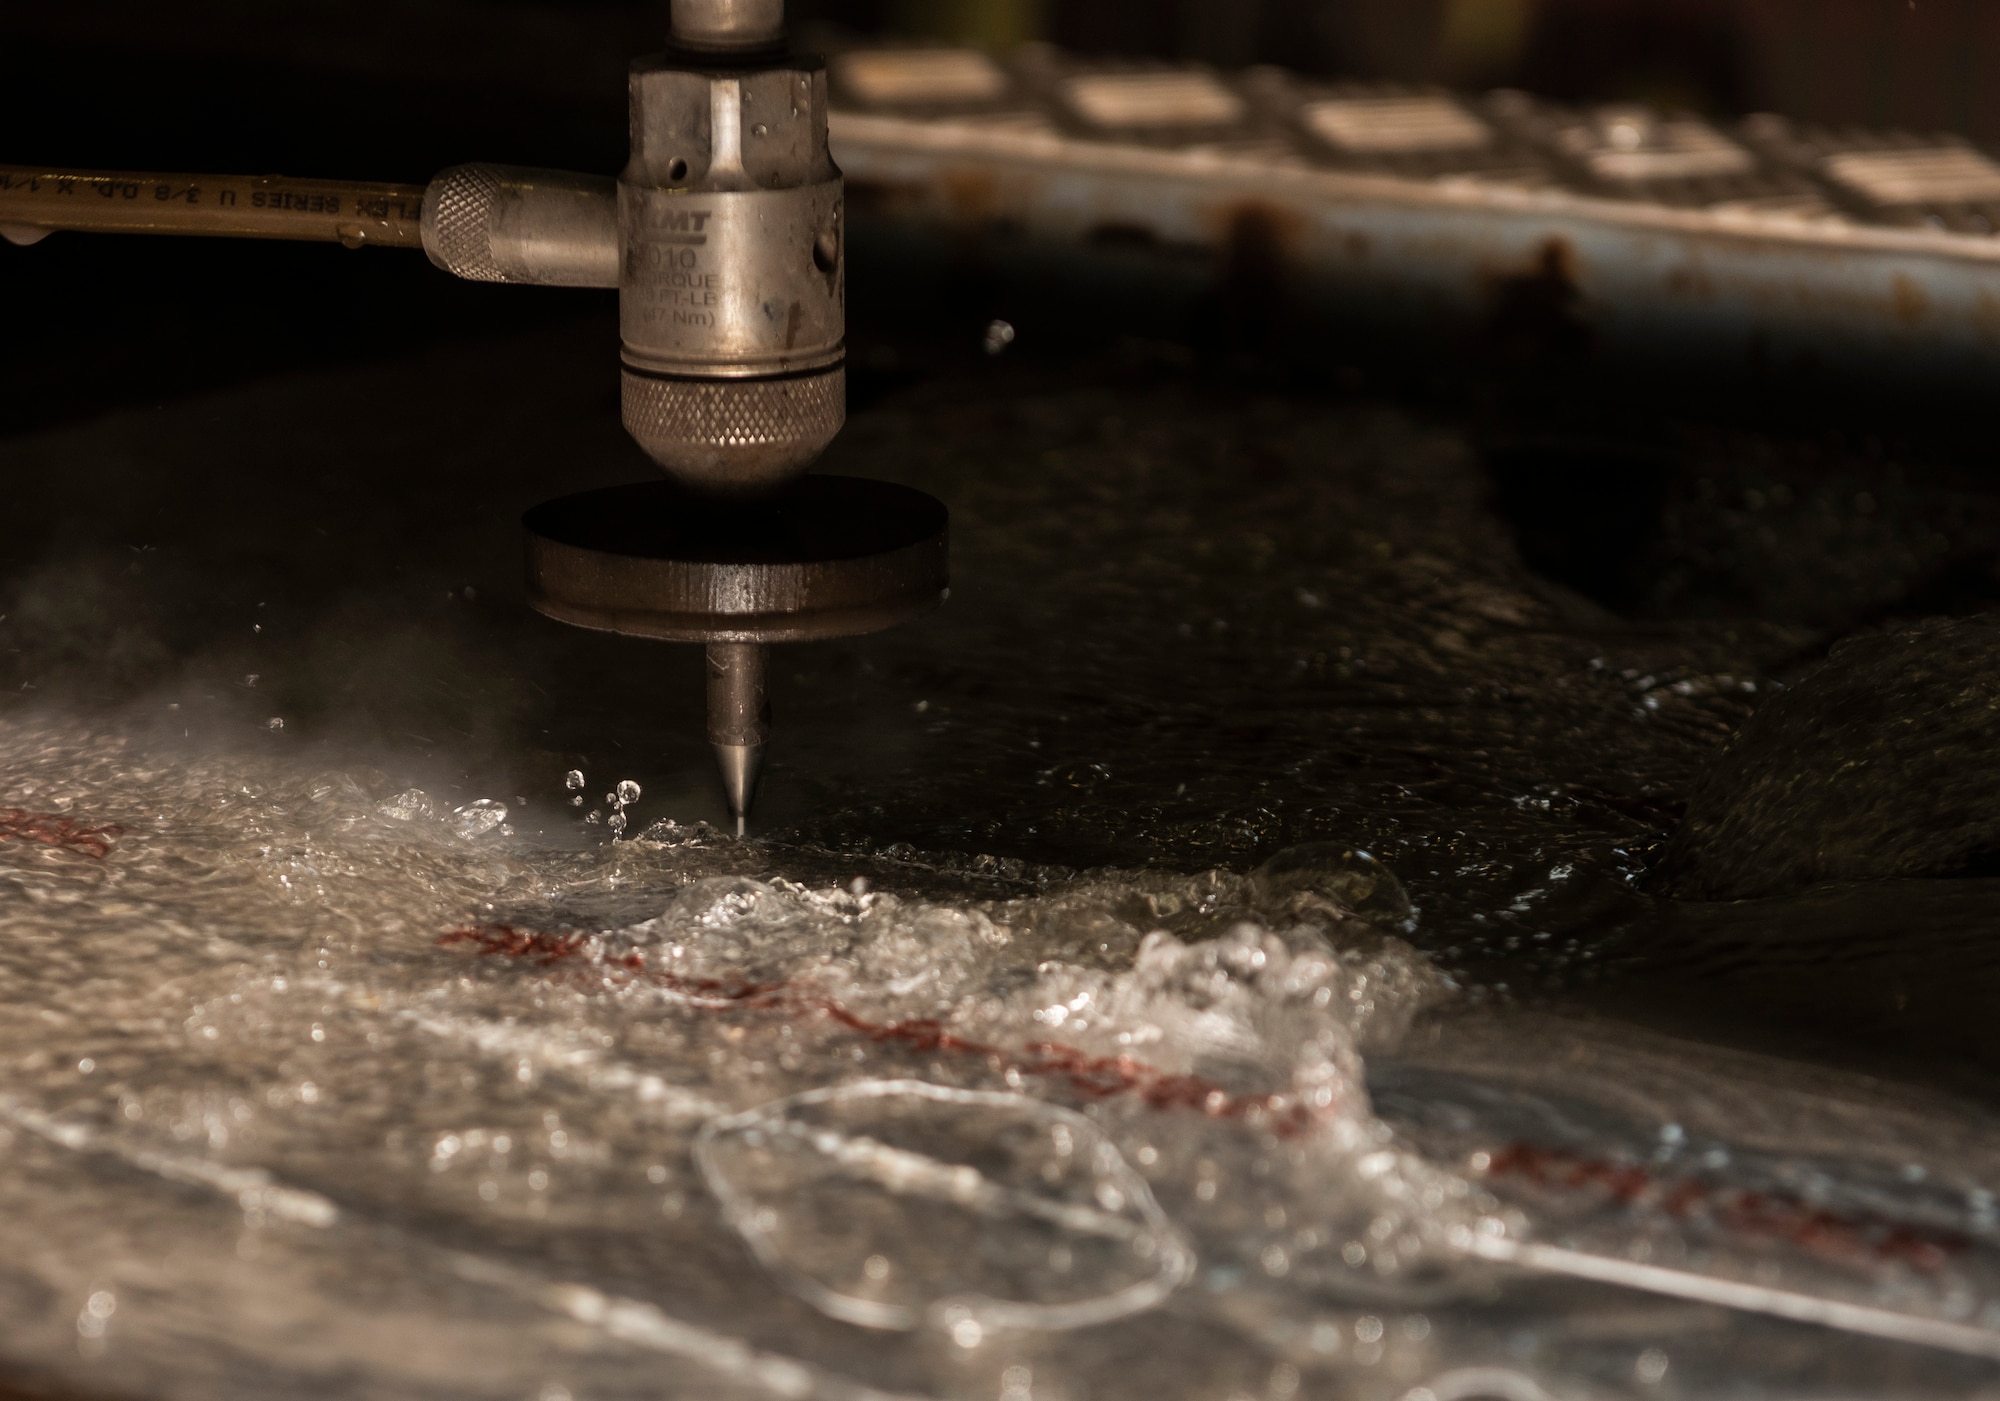 An abrasive water jet machine cuts an aircraft bracket from a sheet of aluminum at Royal Air Force Lakenheath, England, Sept, 15, 2020. The machine uses a combination of water and fine garnet abrasive material, forced through a 0.015” mixing tube at a pressure of 32,000 psi to slice through various metals to create a multitude of aircraft components to keep the 48th Fighter Wings fleet of F-15’s in top flying condition. (U.S. Air Force photo by Airman 1st Class Jessi Monte)